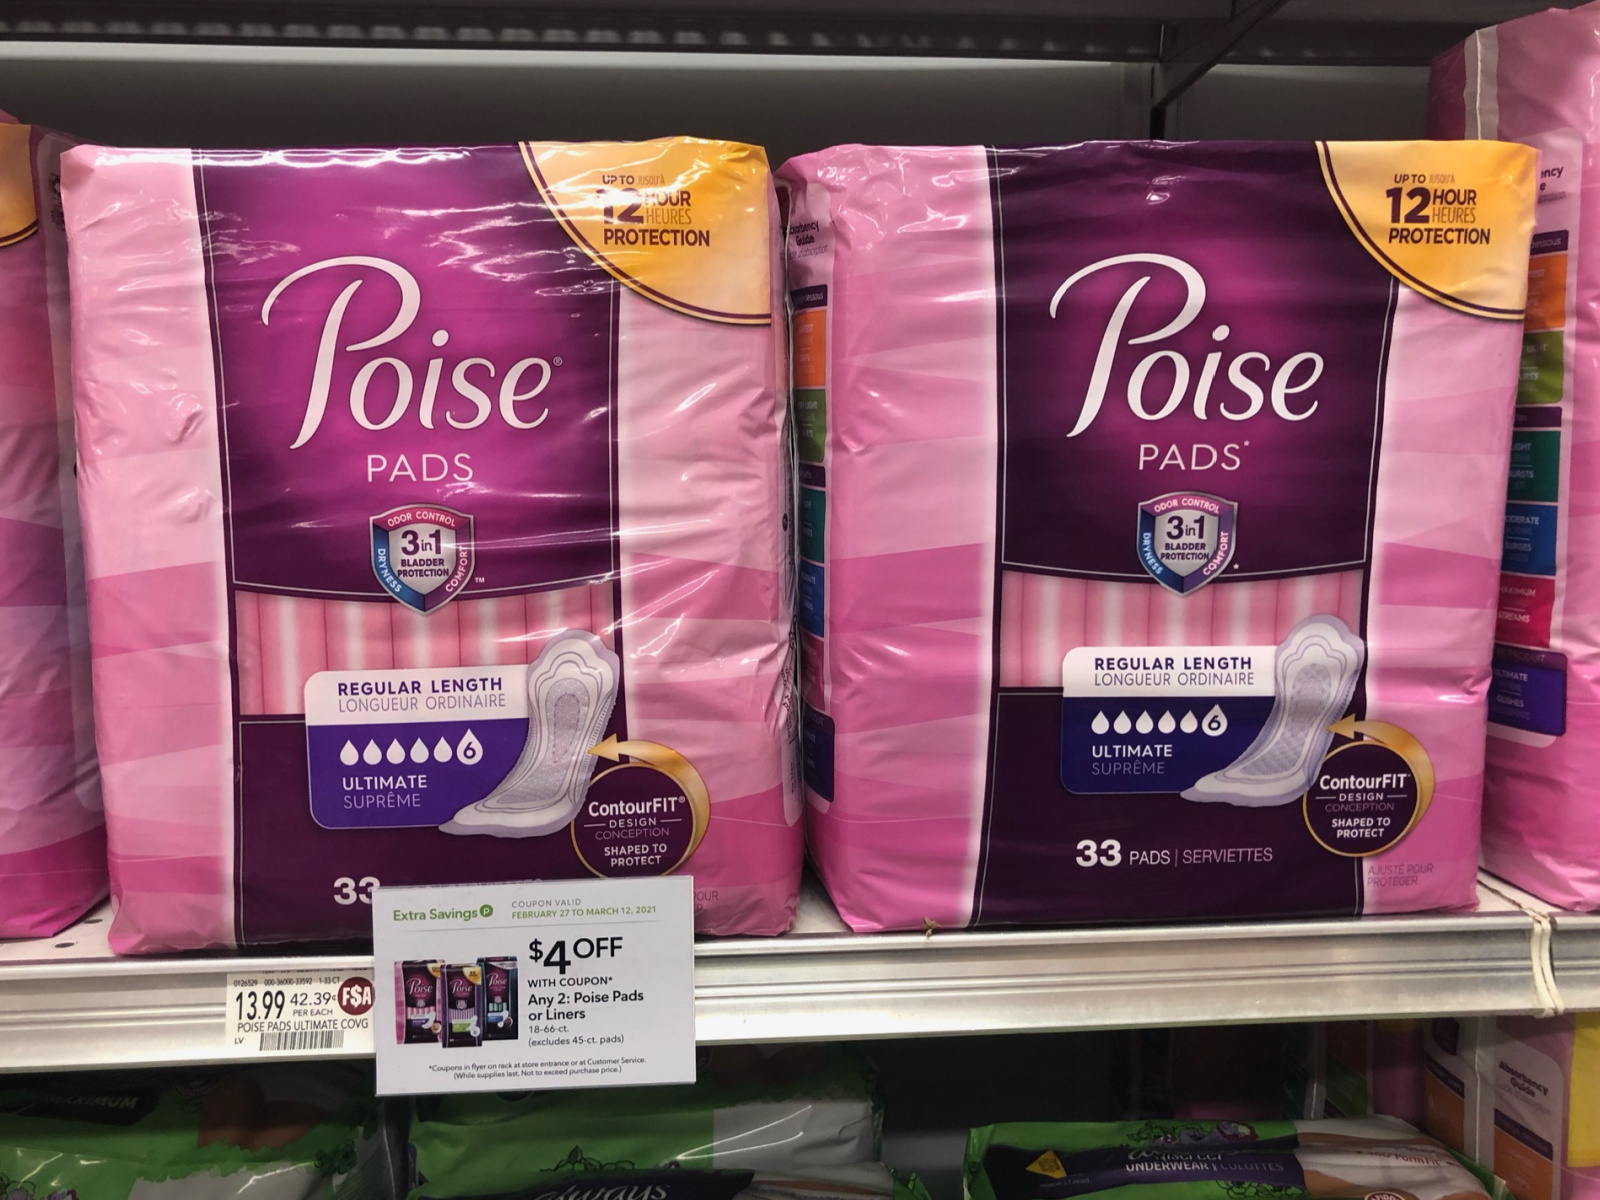 Don't Miss The Big Savings On Poise And Depend Products This Week At Publix on I Heart Publix